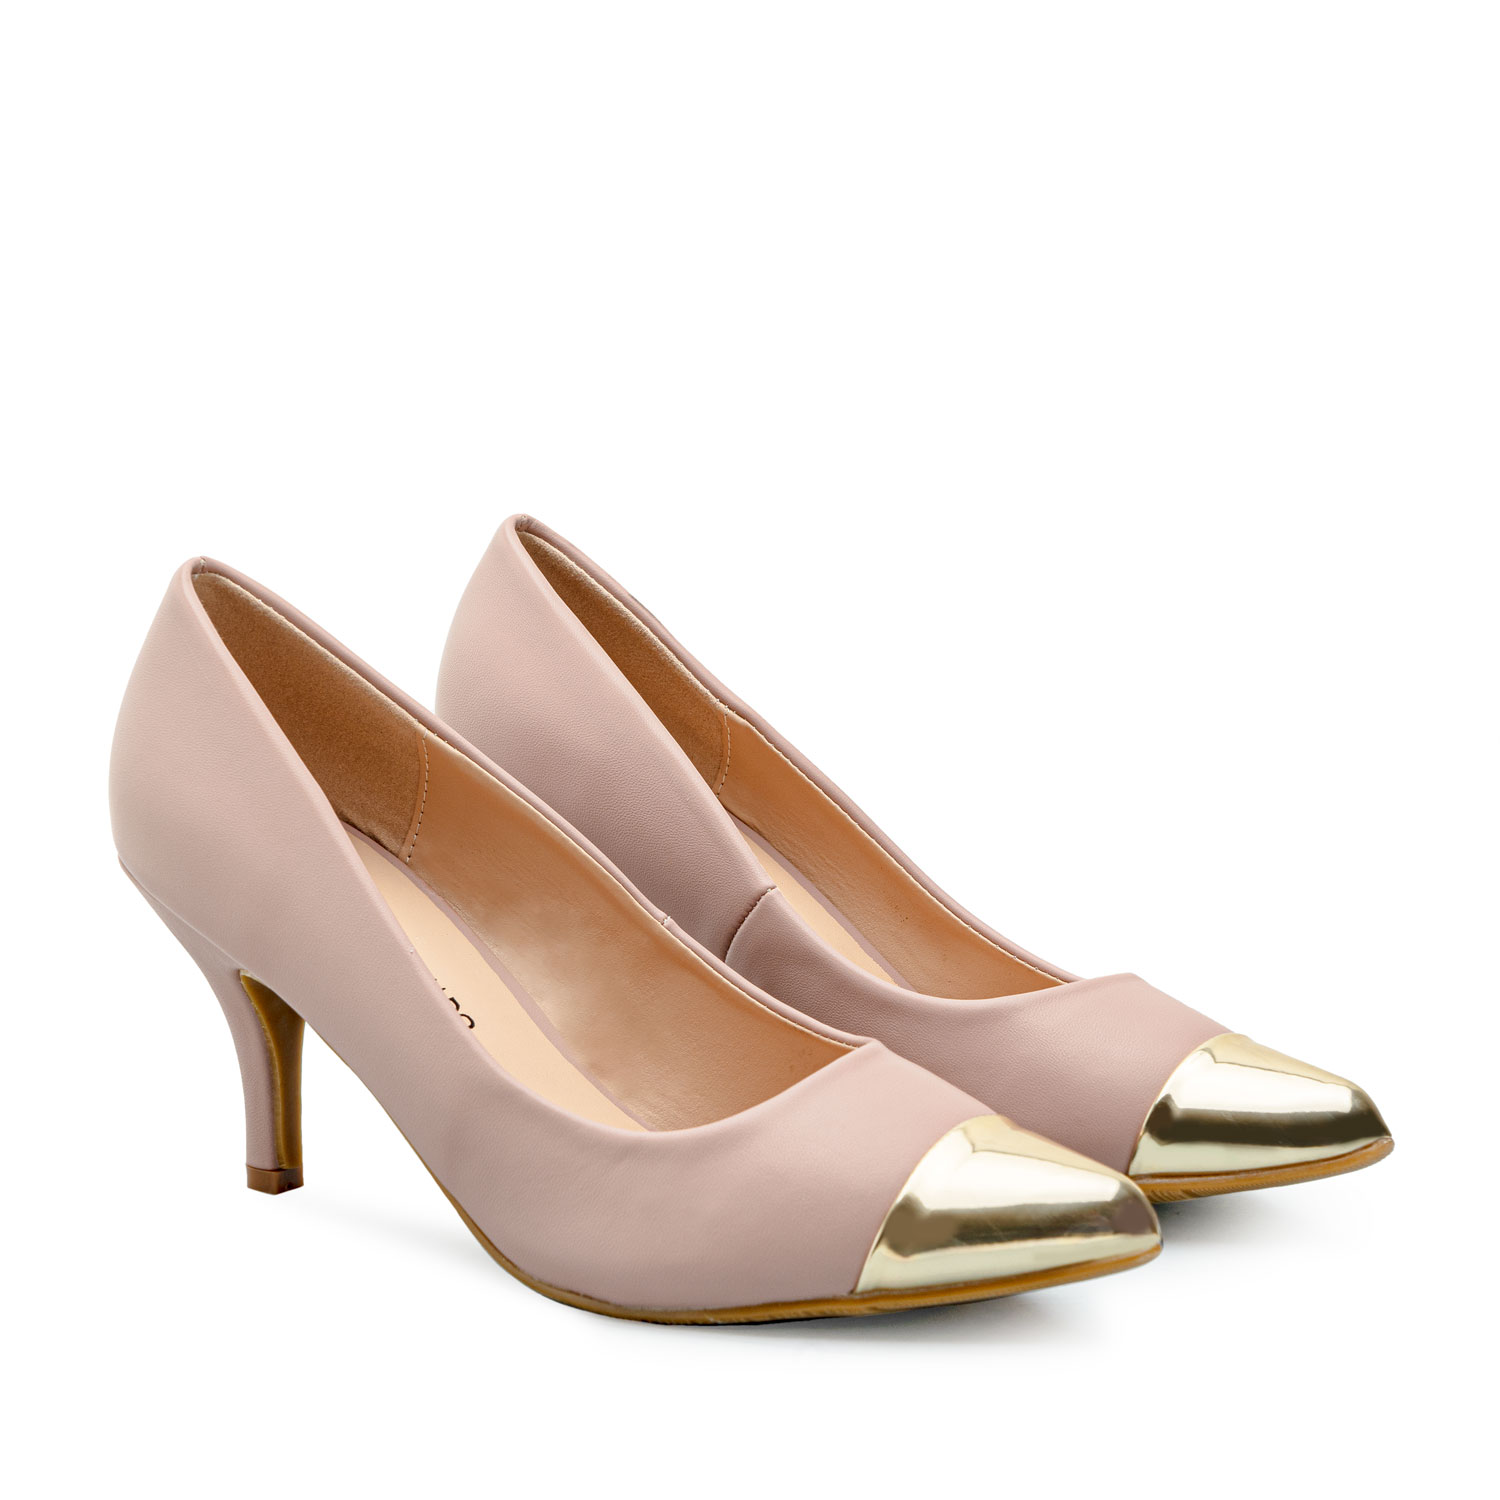 Stilettos in Nude Faux leather with Golden Toe Cap 